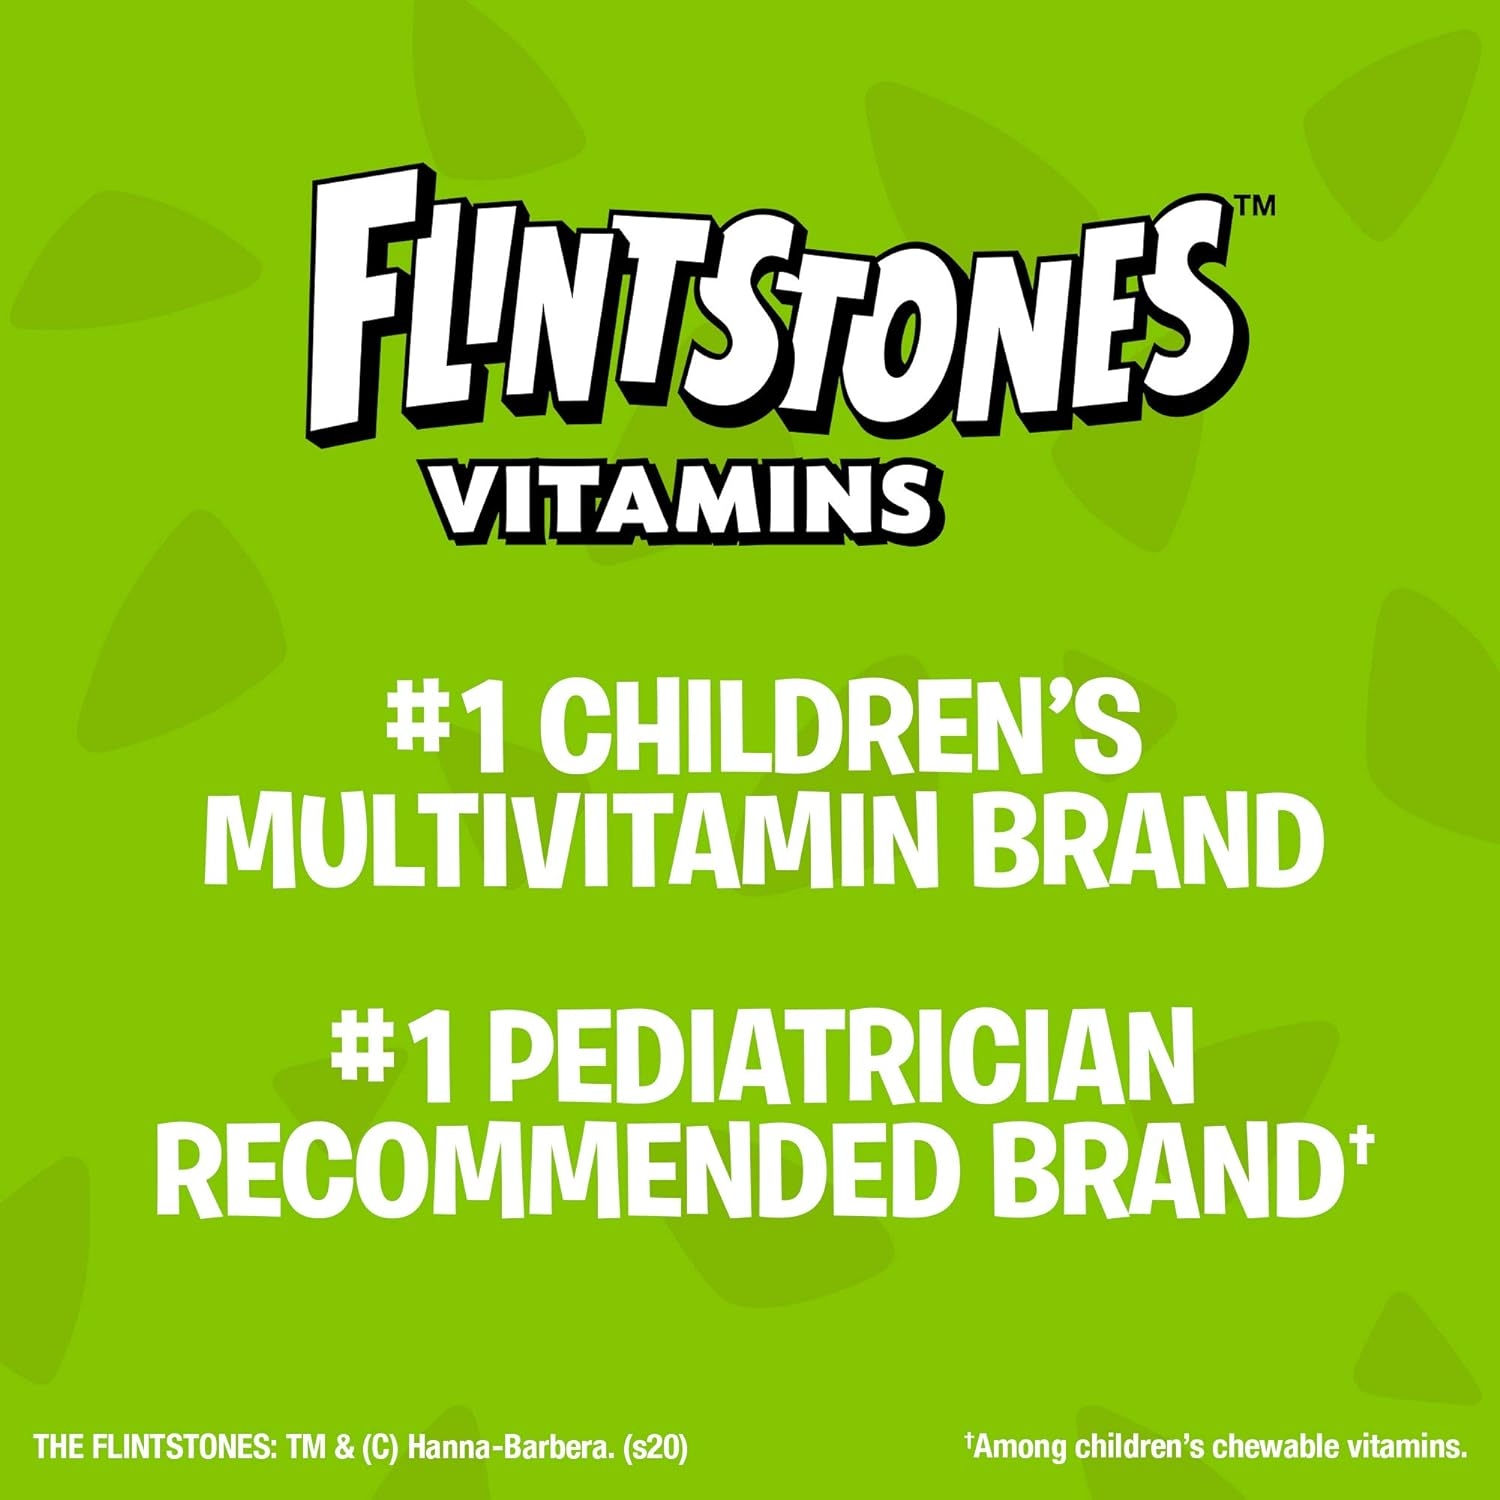 Flintstones Chewable Kids Vitamins, Complete Multivitamin for Kids and Toddlers with Iron, Calcium, Vitamin C, Vitamin D & more, 180 count (Packaging May Vary)